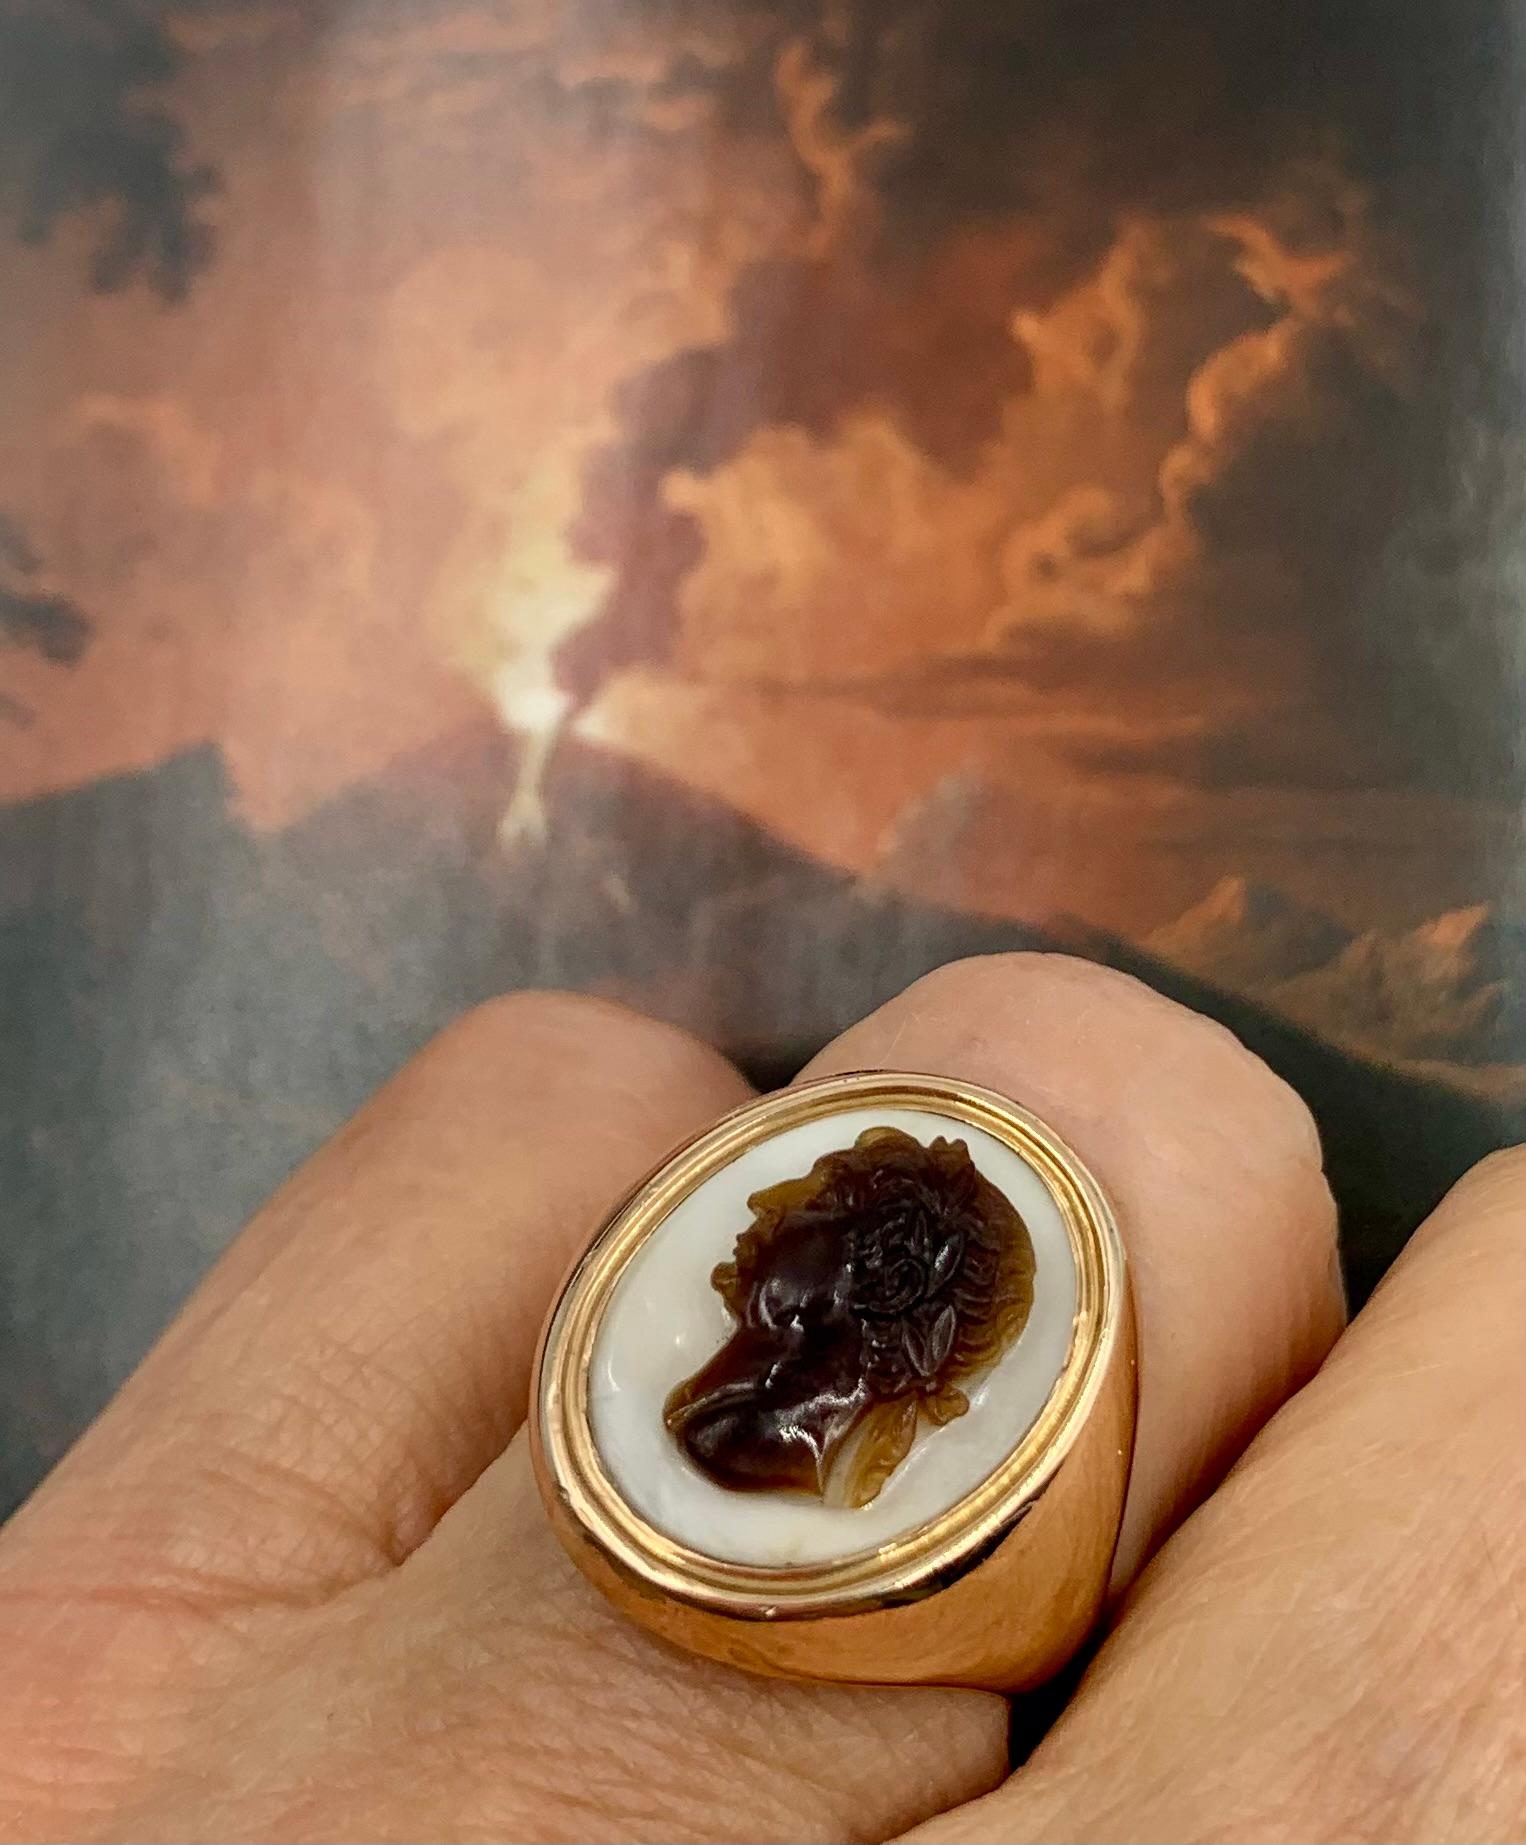 Superbly carved Georgian period sardonyx cameo signet ring depicting  Roman Emperor Augustus in profile
Late 18th/ Early 19th Century
Condition: Very Good, age appropriate wear
Size: 5.75 US
Width: 20mm
Height: 20mm
Tested for 18K gold